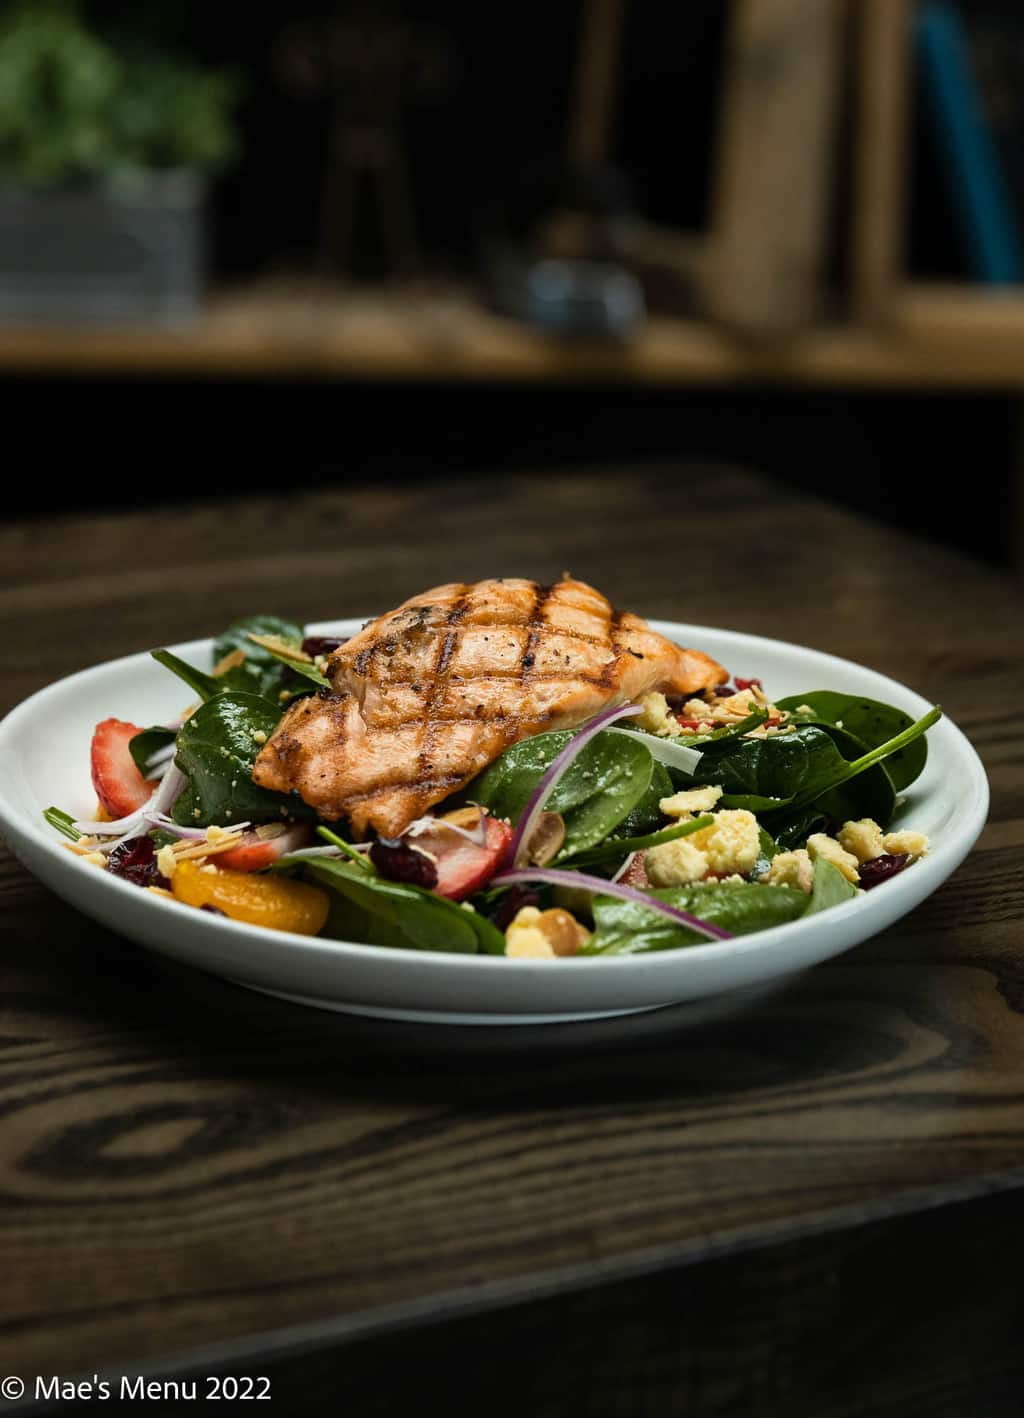 A large white plate of a salmon and spinach salad.